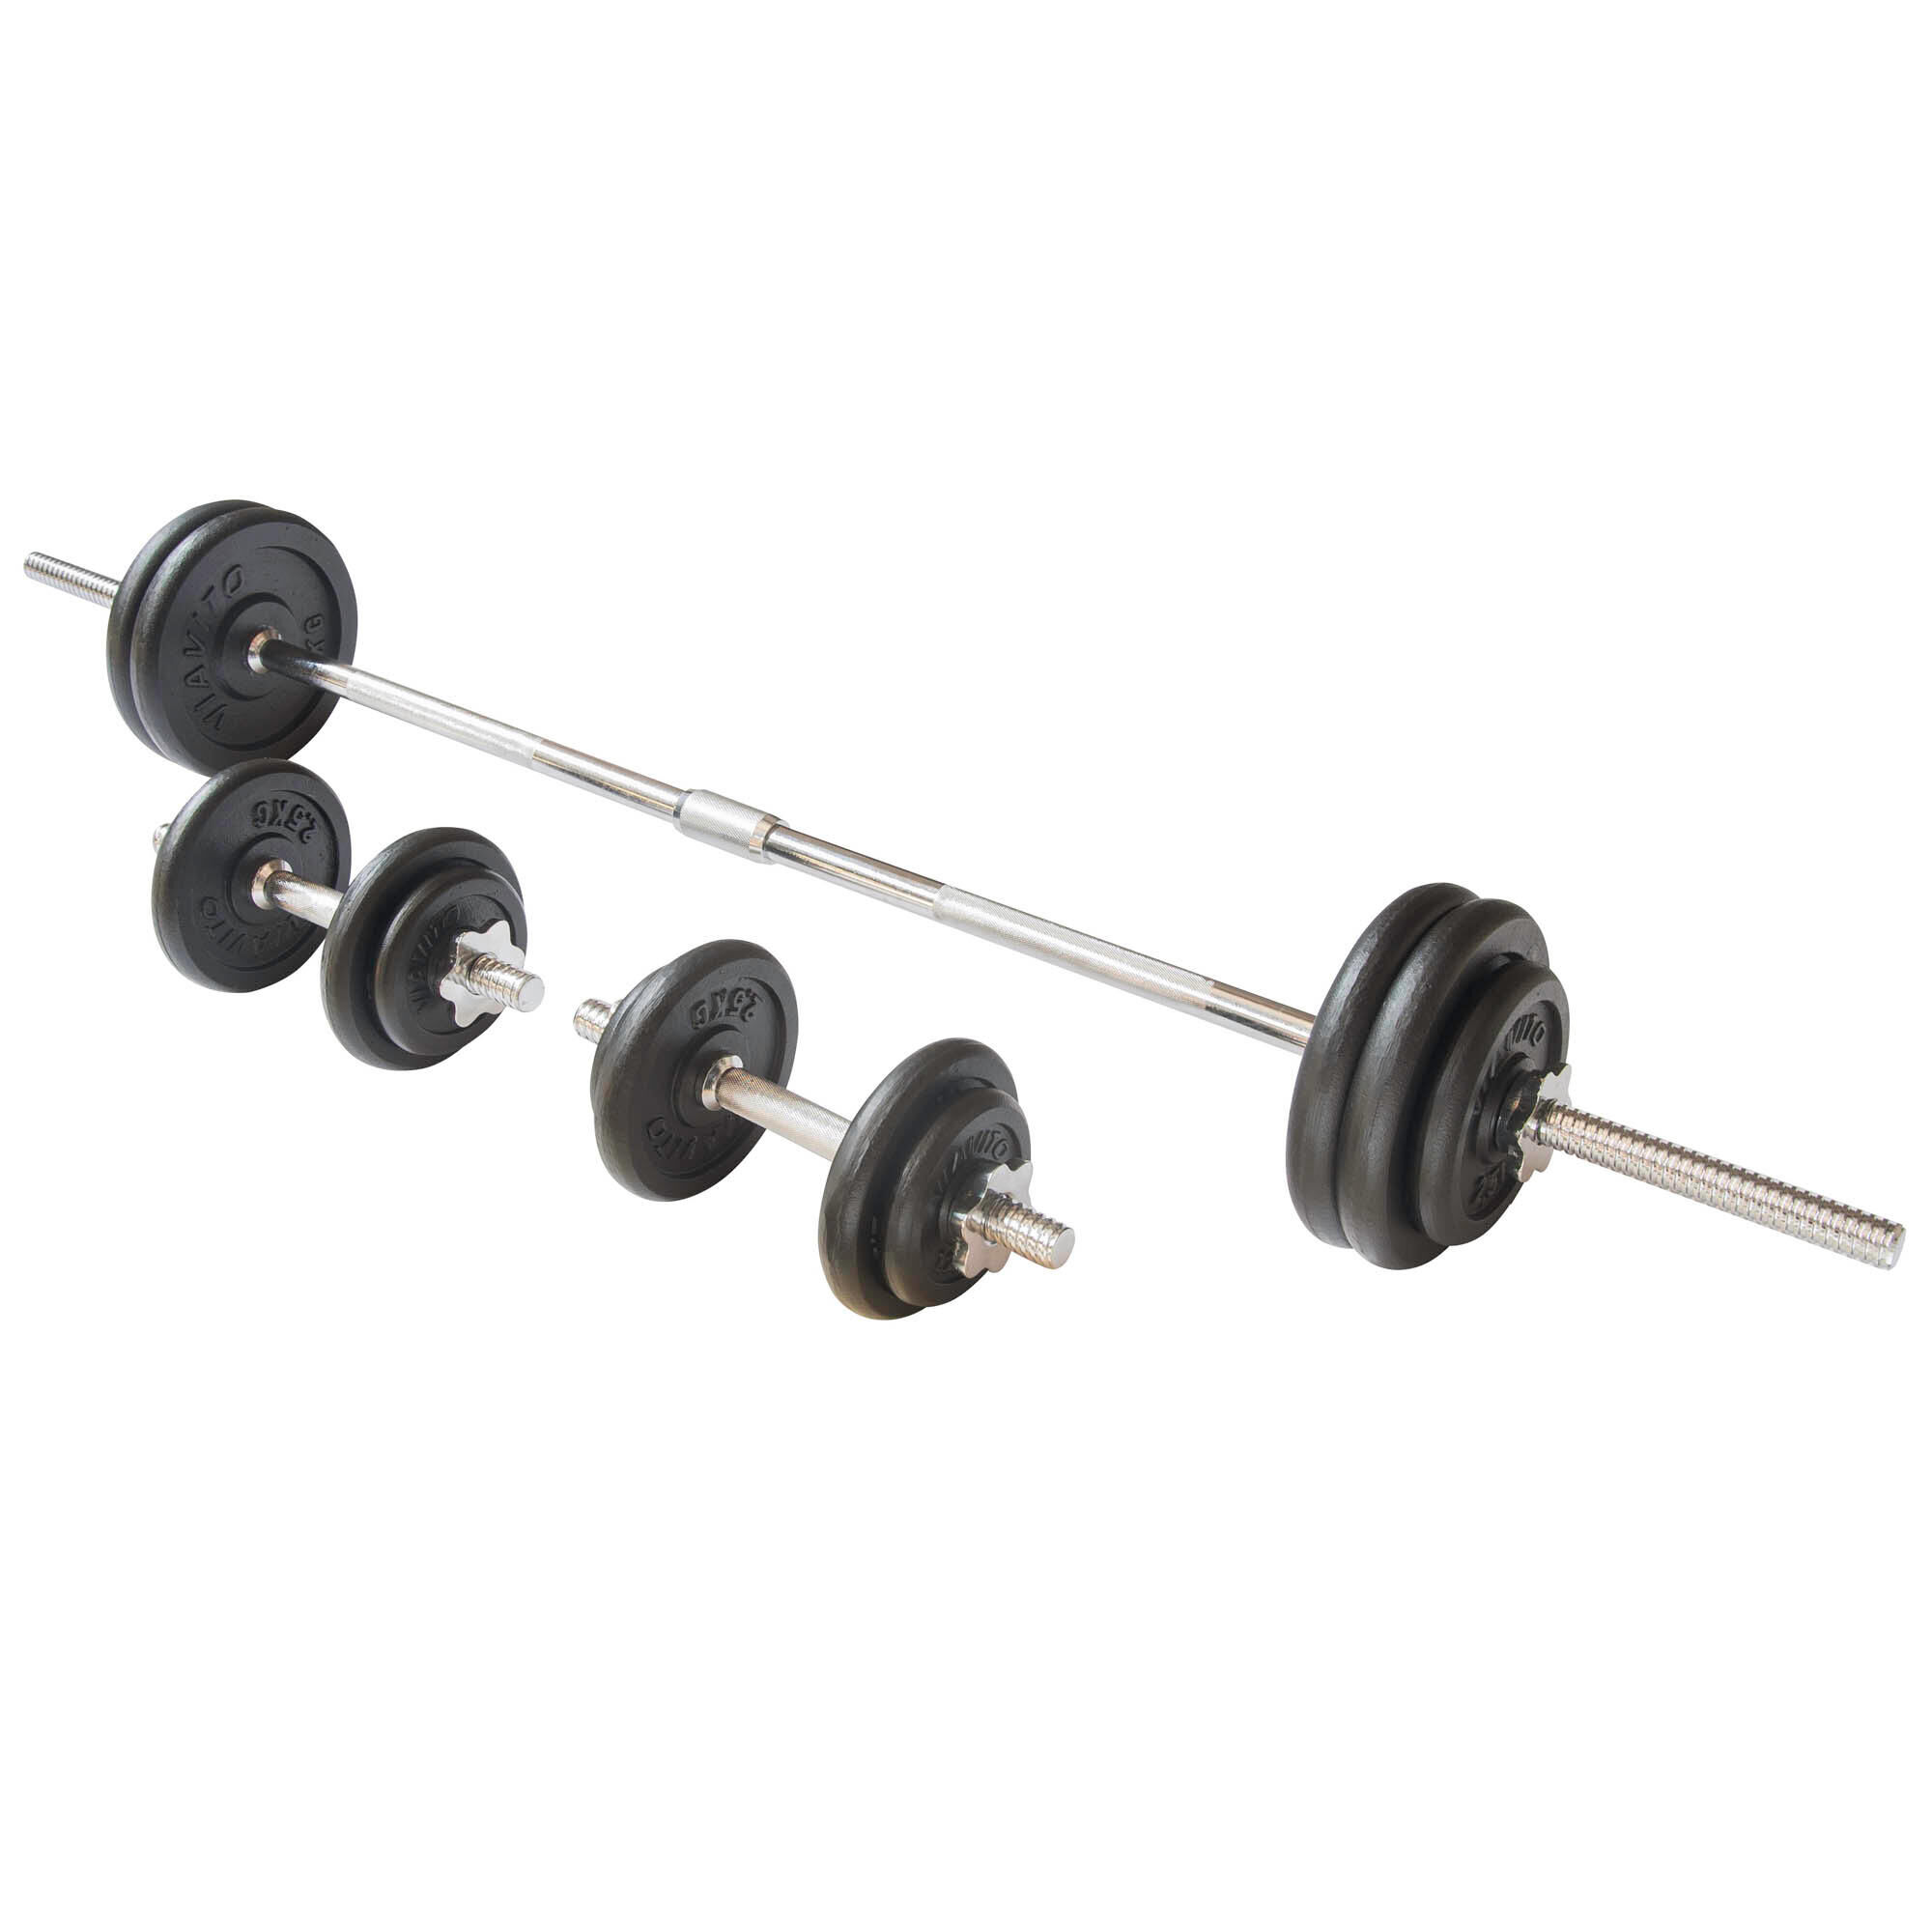 VIAVITO Viavito 50kg Black Cast Iron Barbell and Dumbbell Weight Set